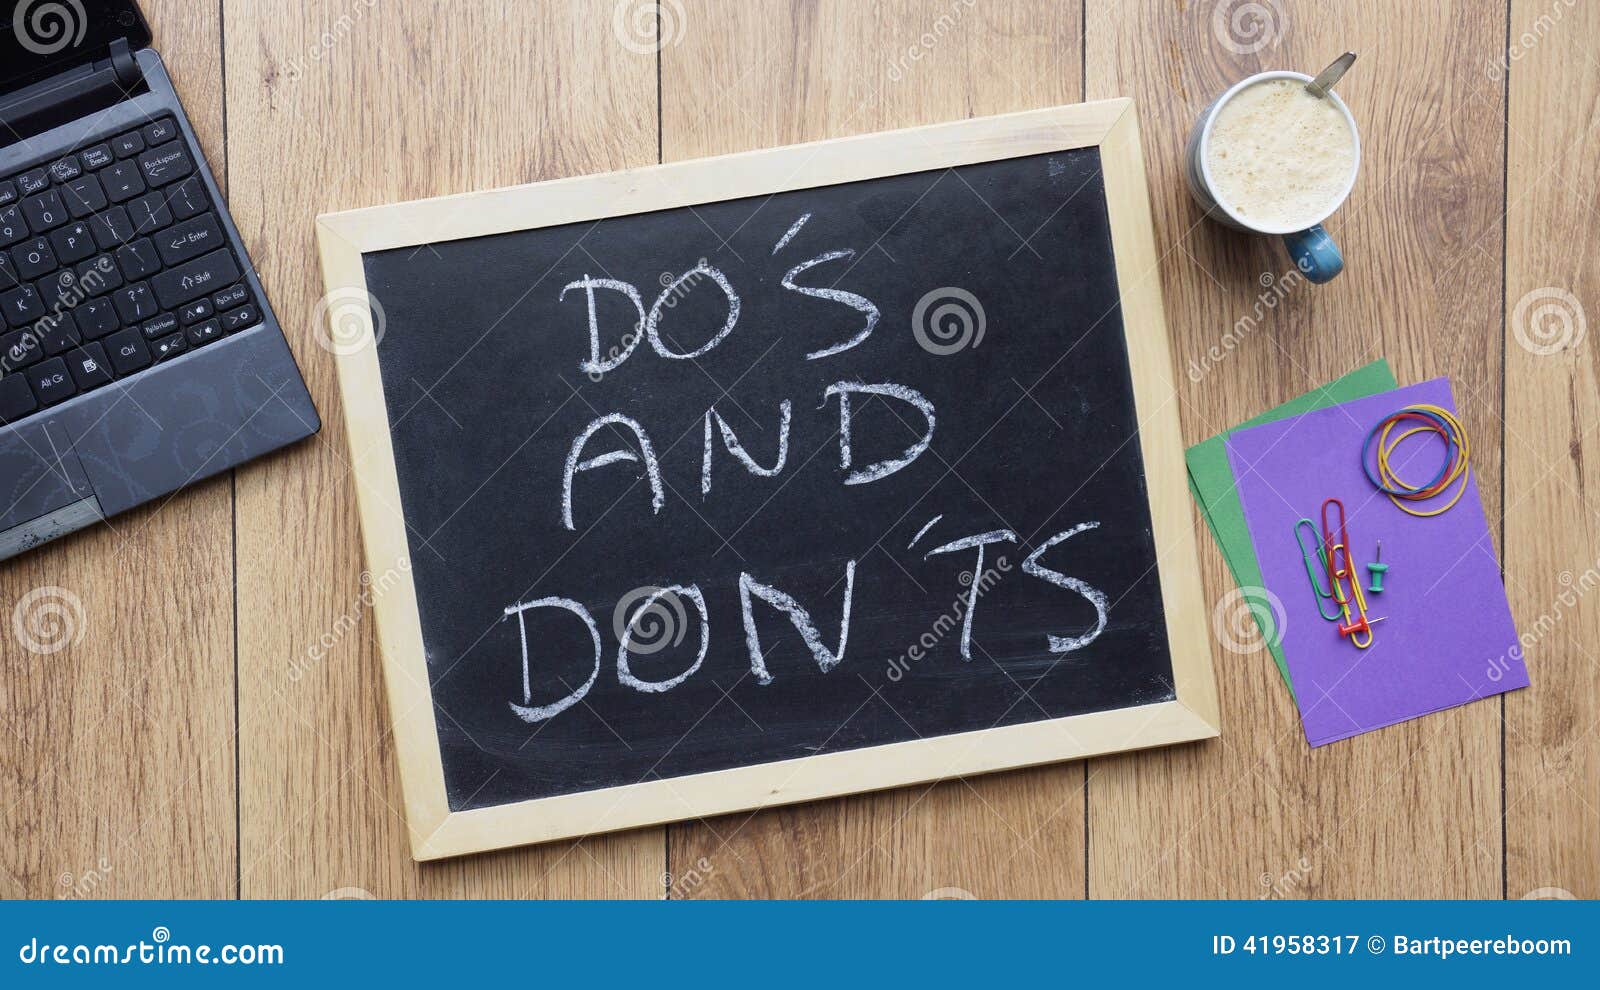 do's and don'ts written